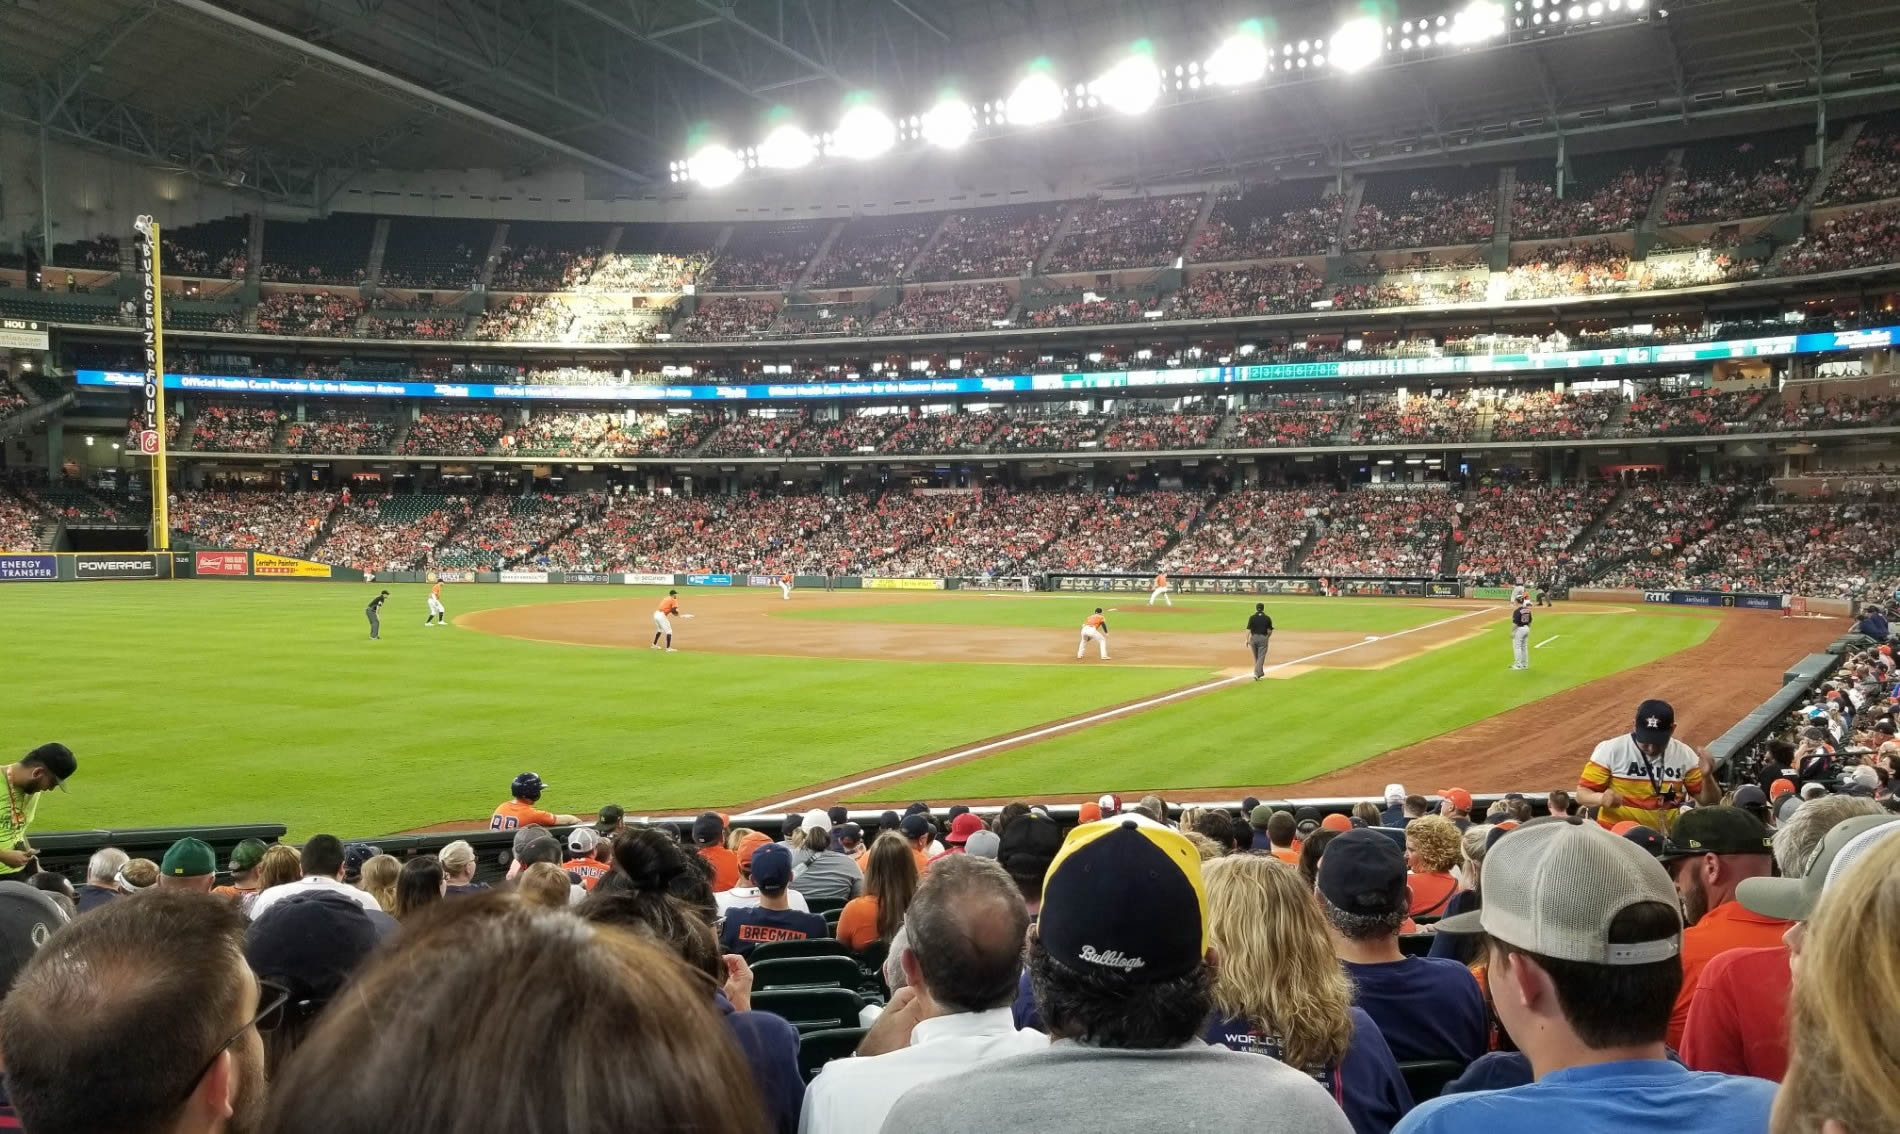 section 106, row 13 seat view  for baseball - minute maid park